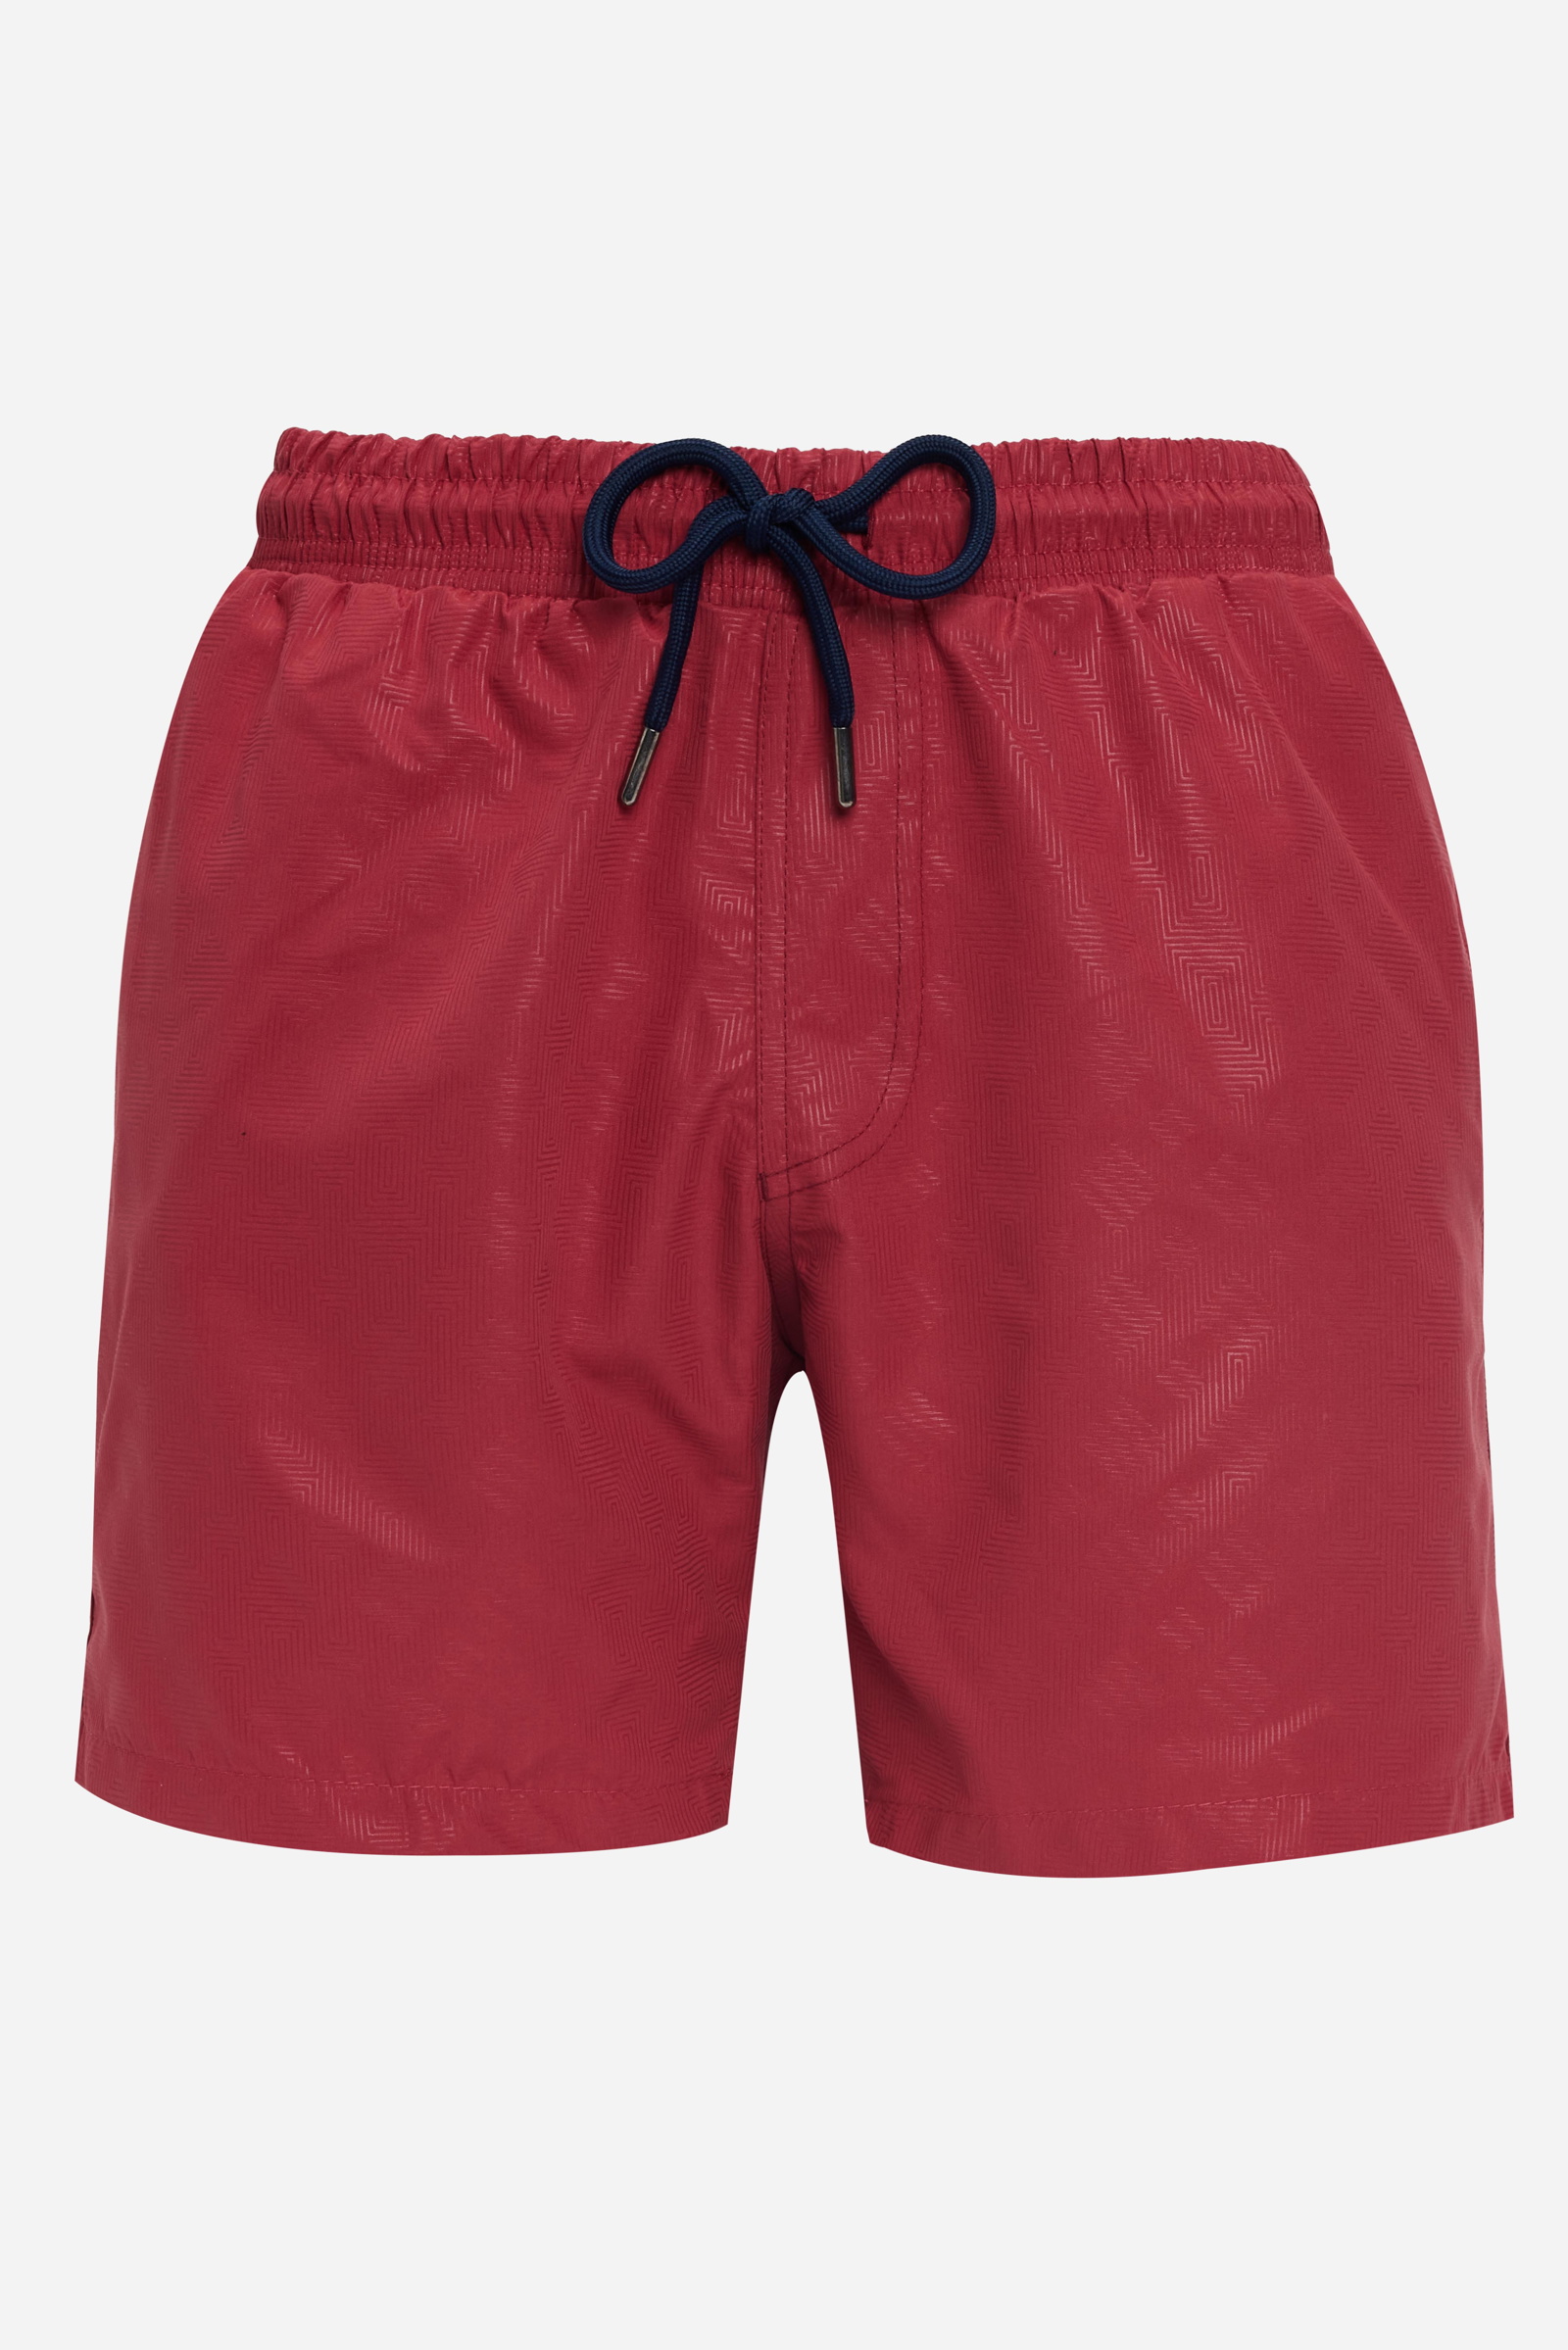 Printed Claret Red Shorts